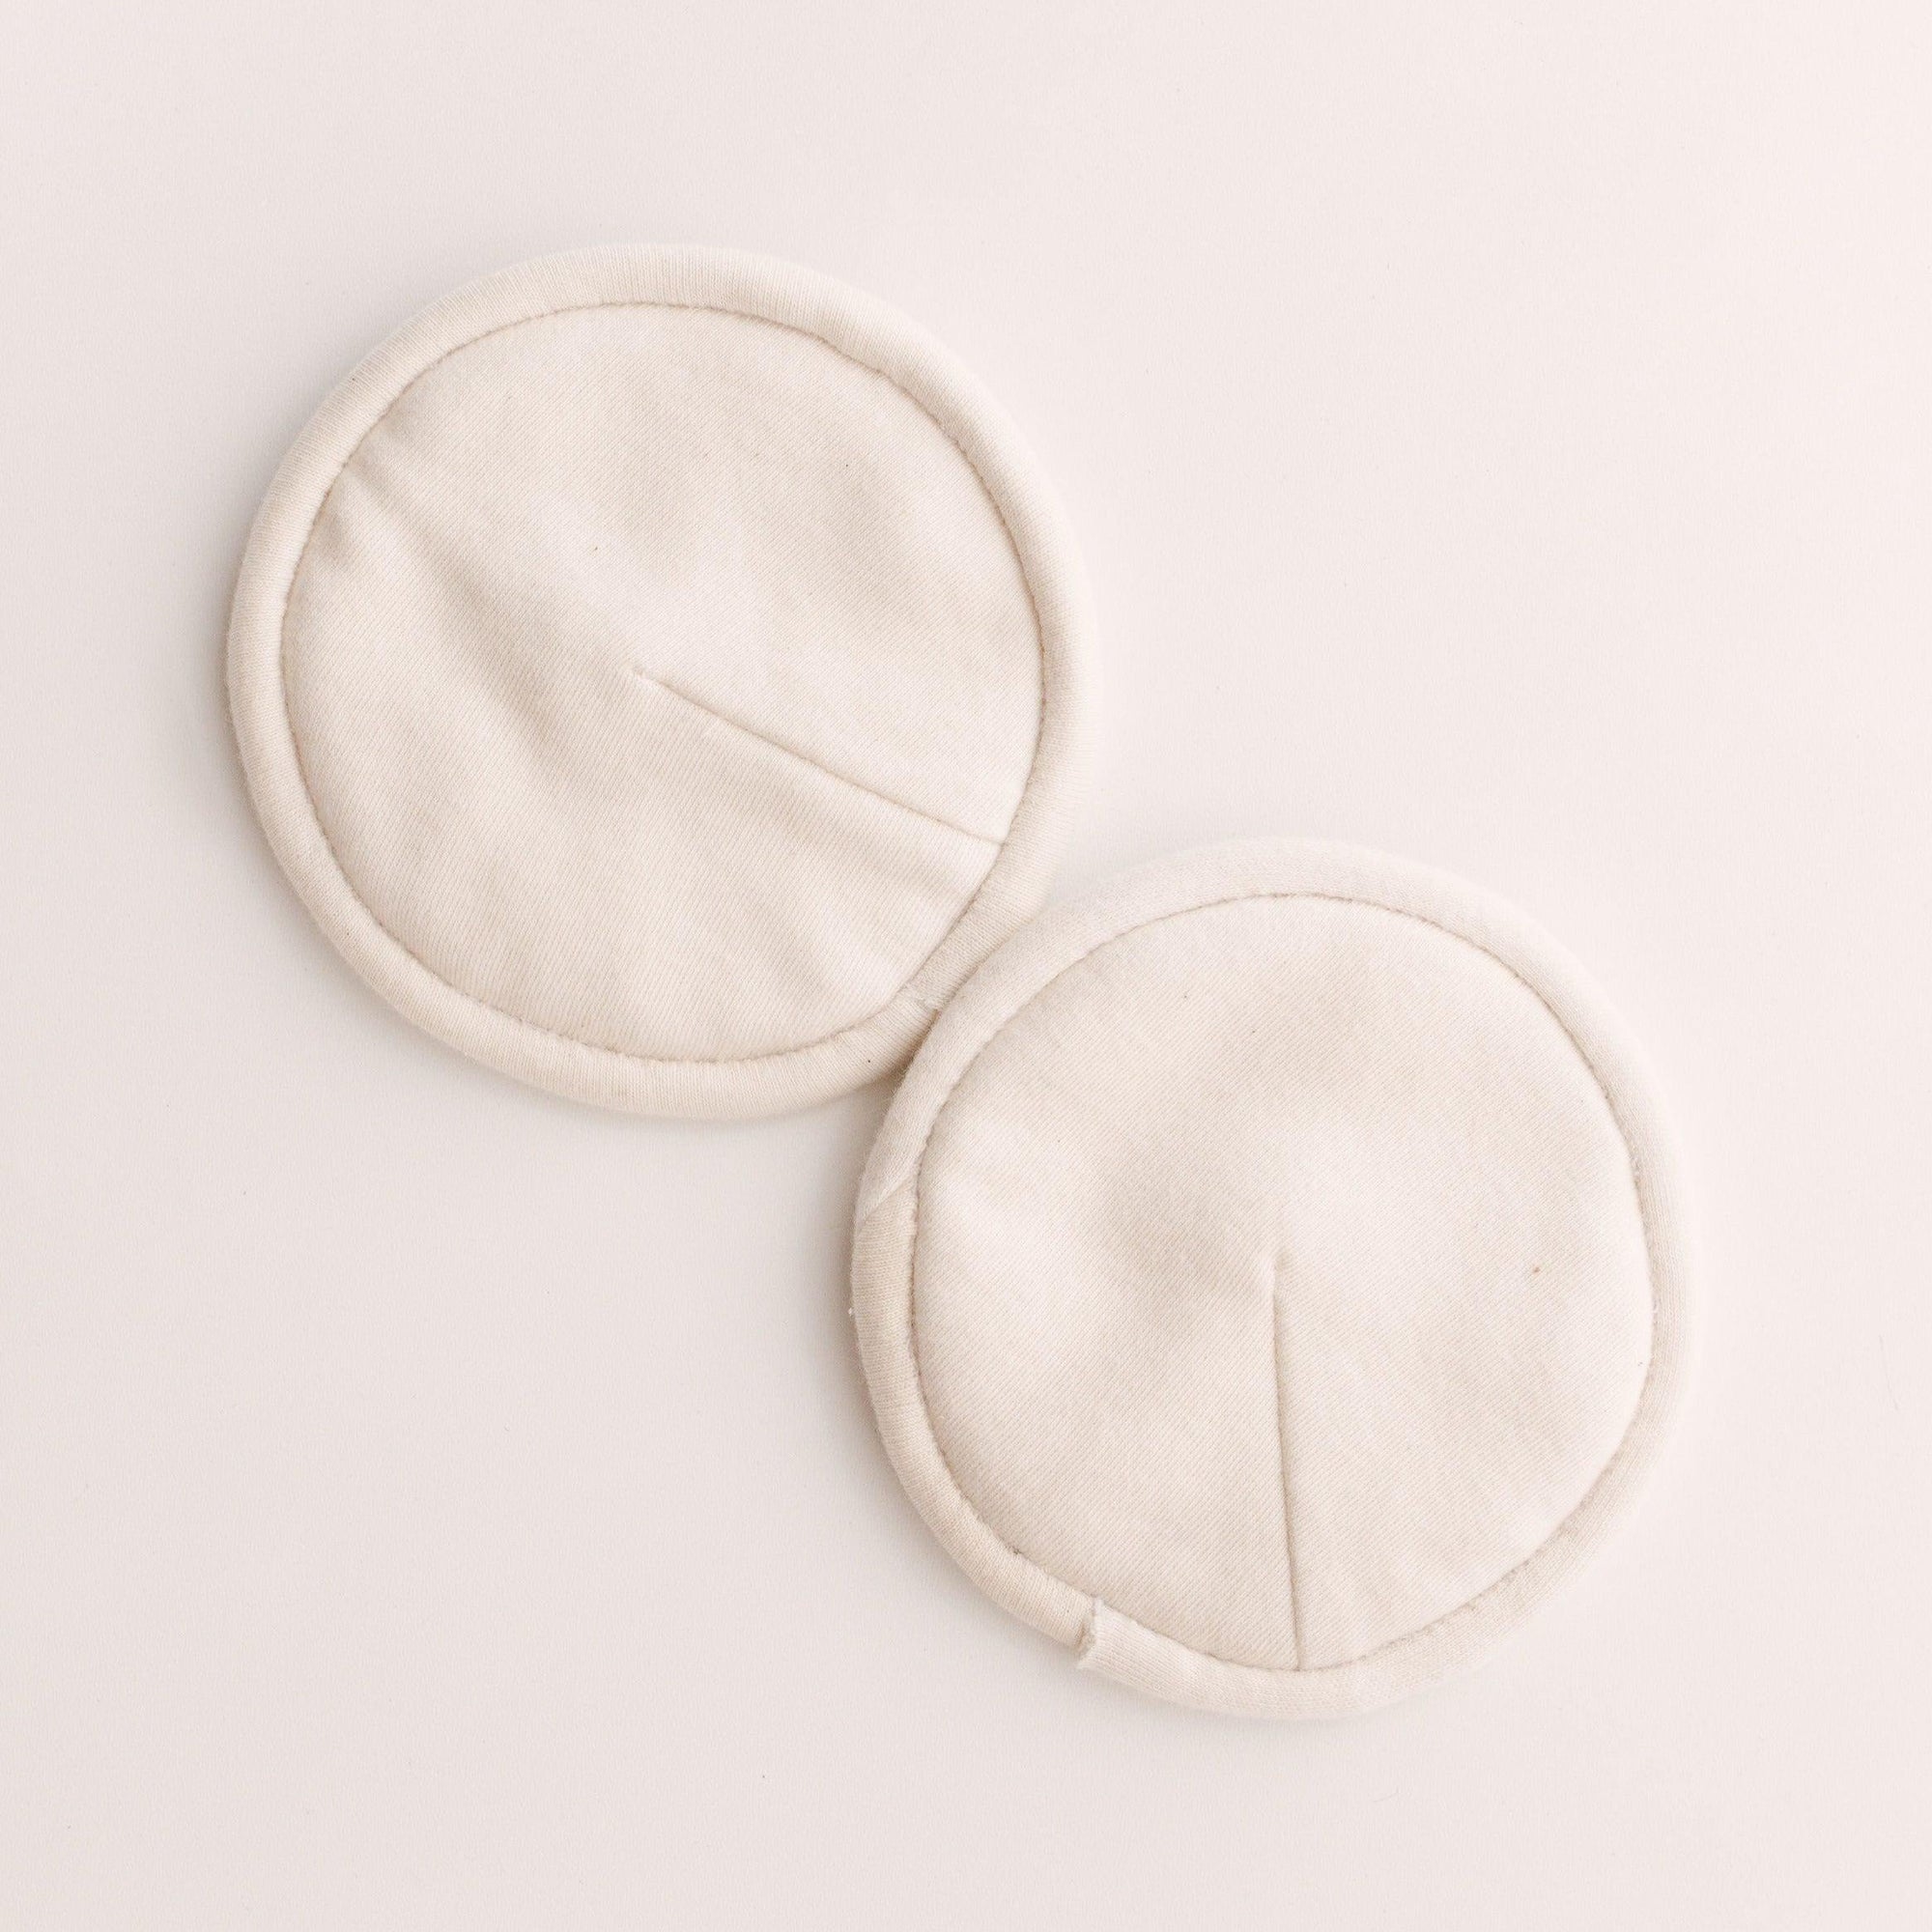 Two Bundl. white cloth breast pads on a white surface.